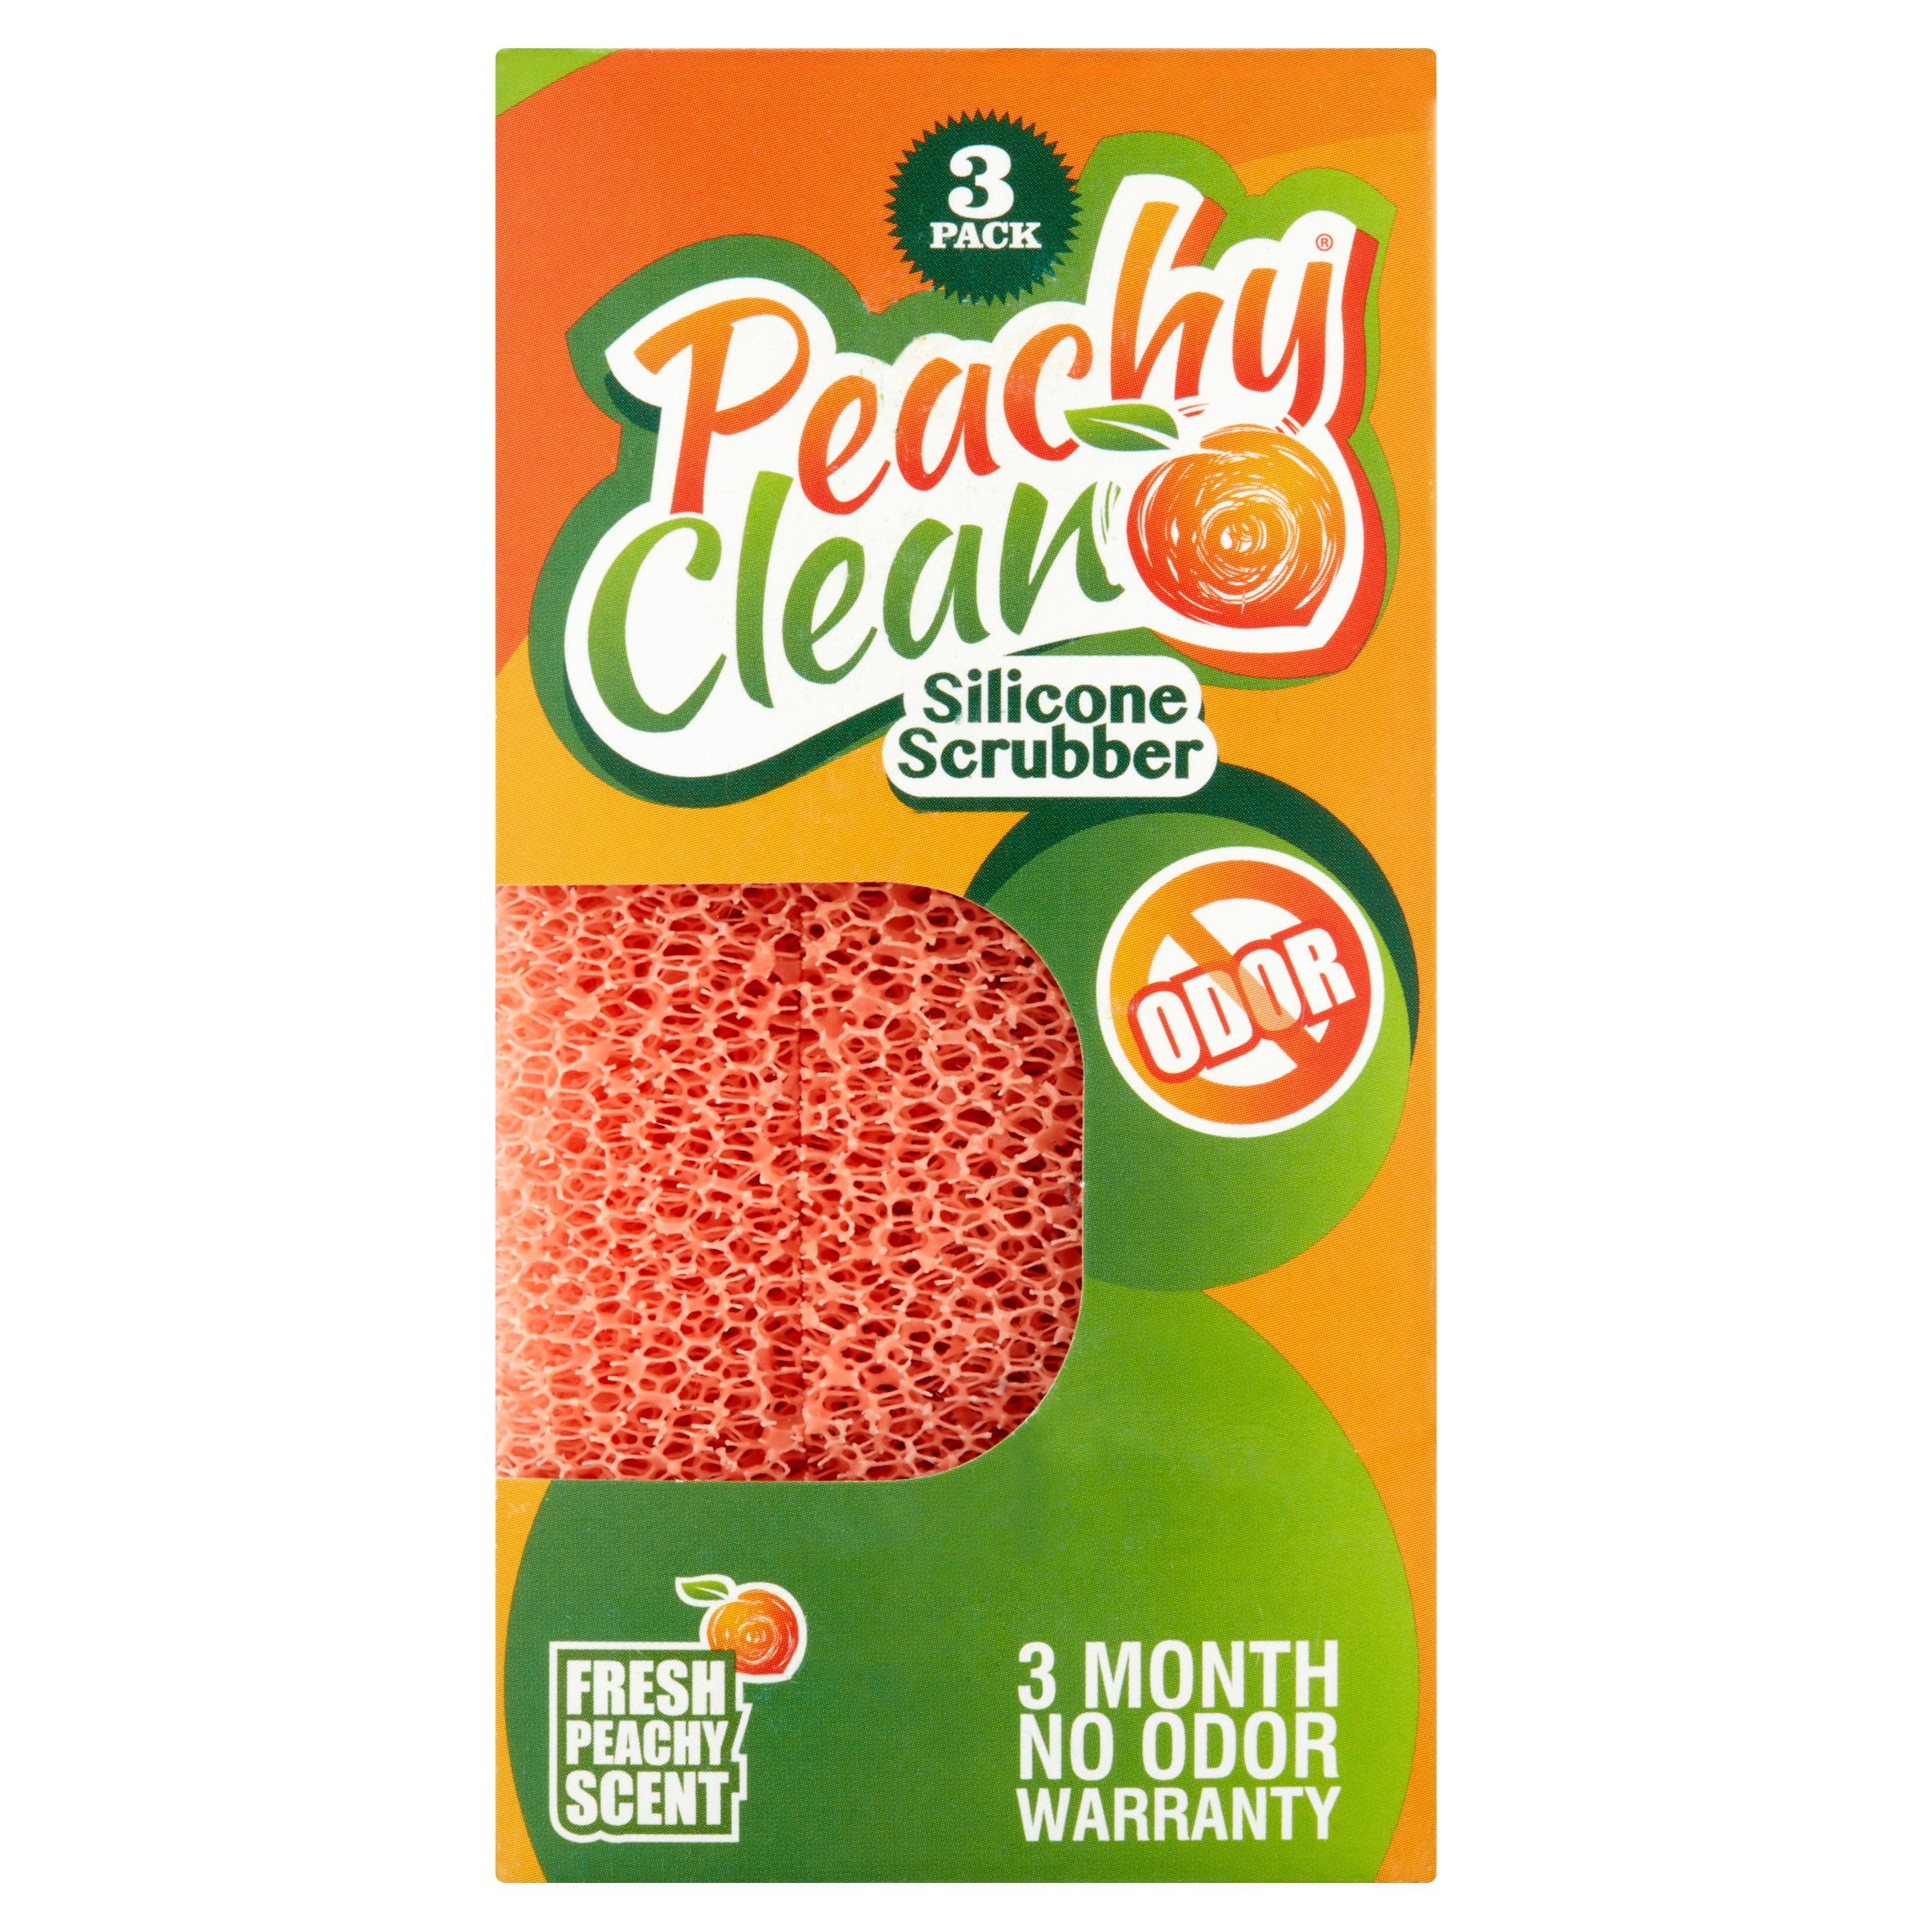  Grand Fusion Peachy Clean Sponges, Kitchen Cleaning Supplies  with Fresh Peachy Scent, Dish Scrubber, Pack of 2 : Health & Household